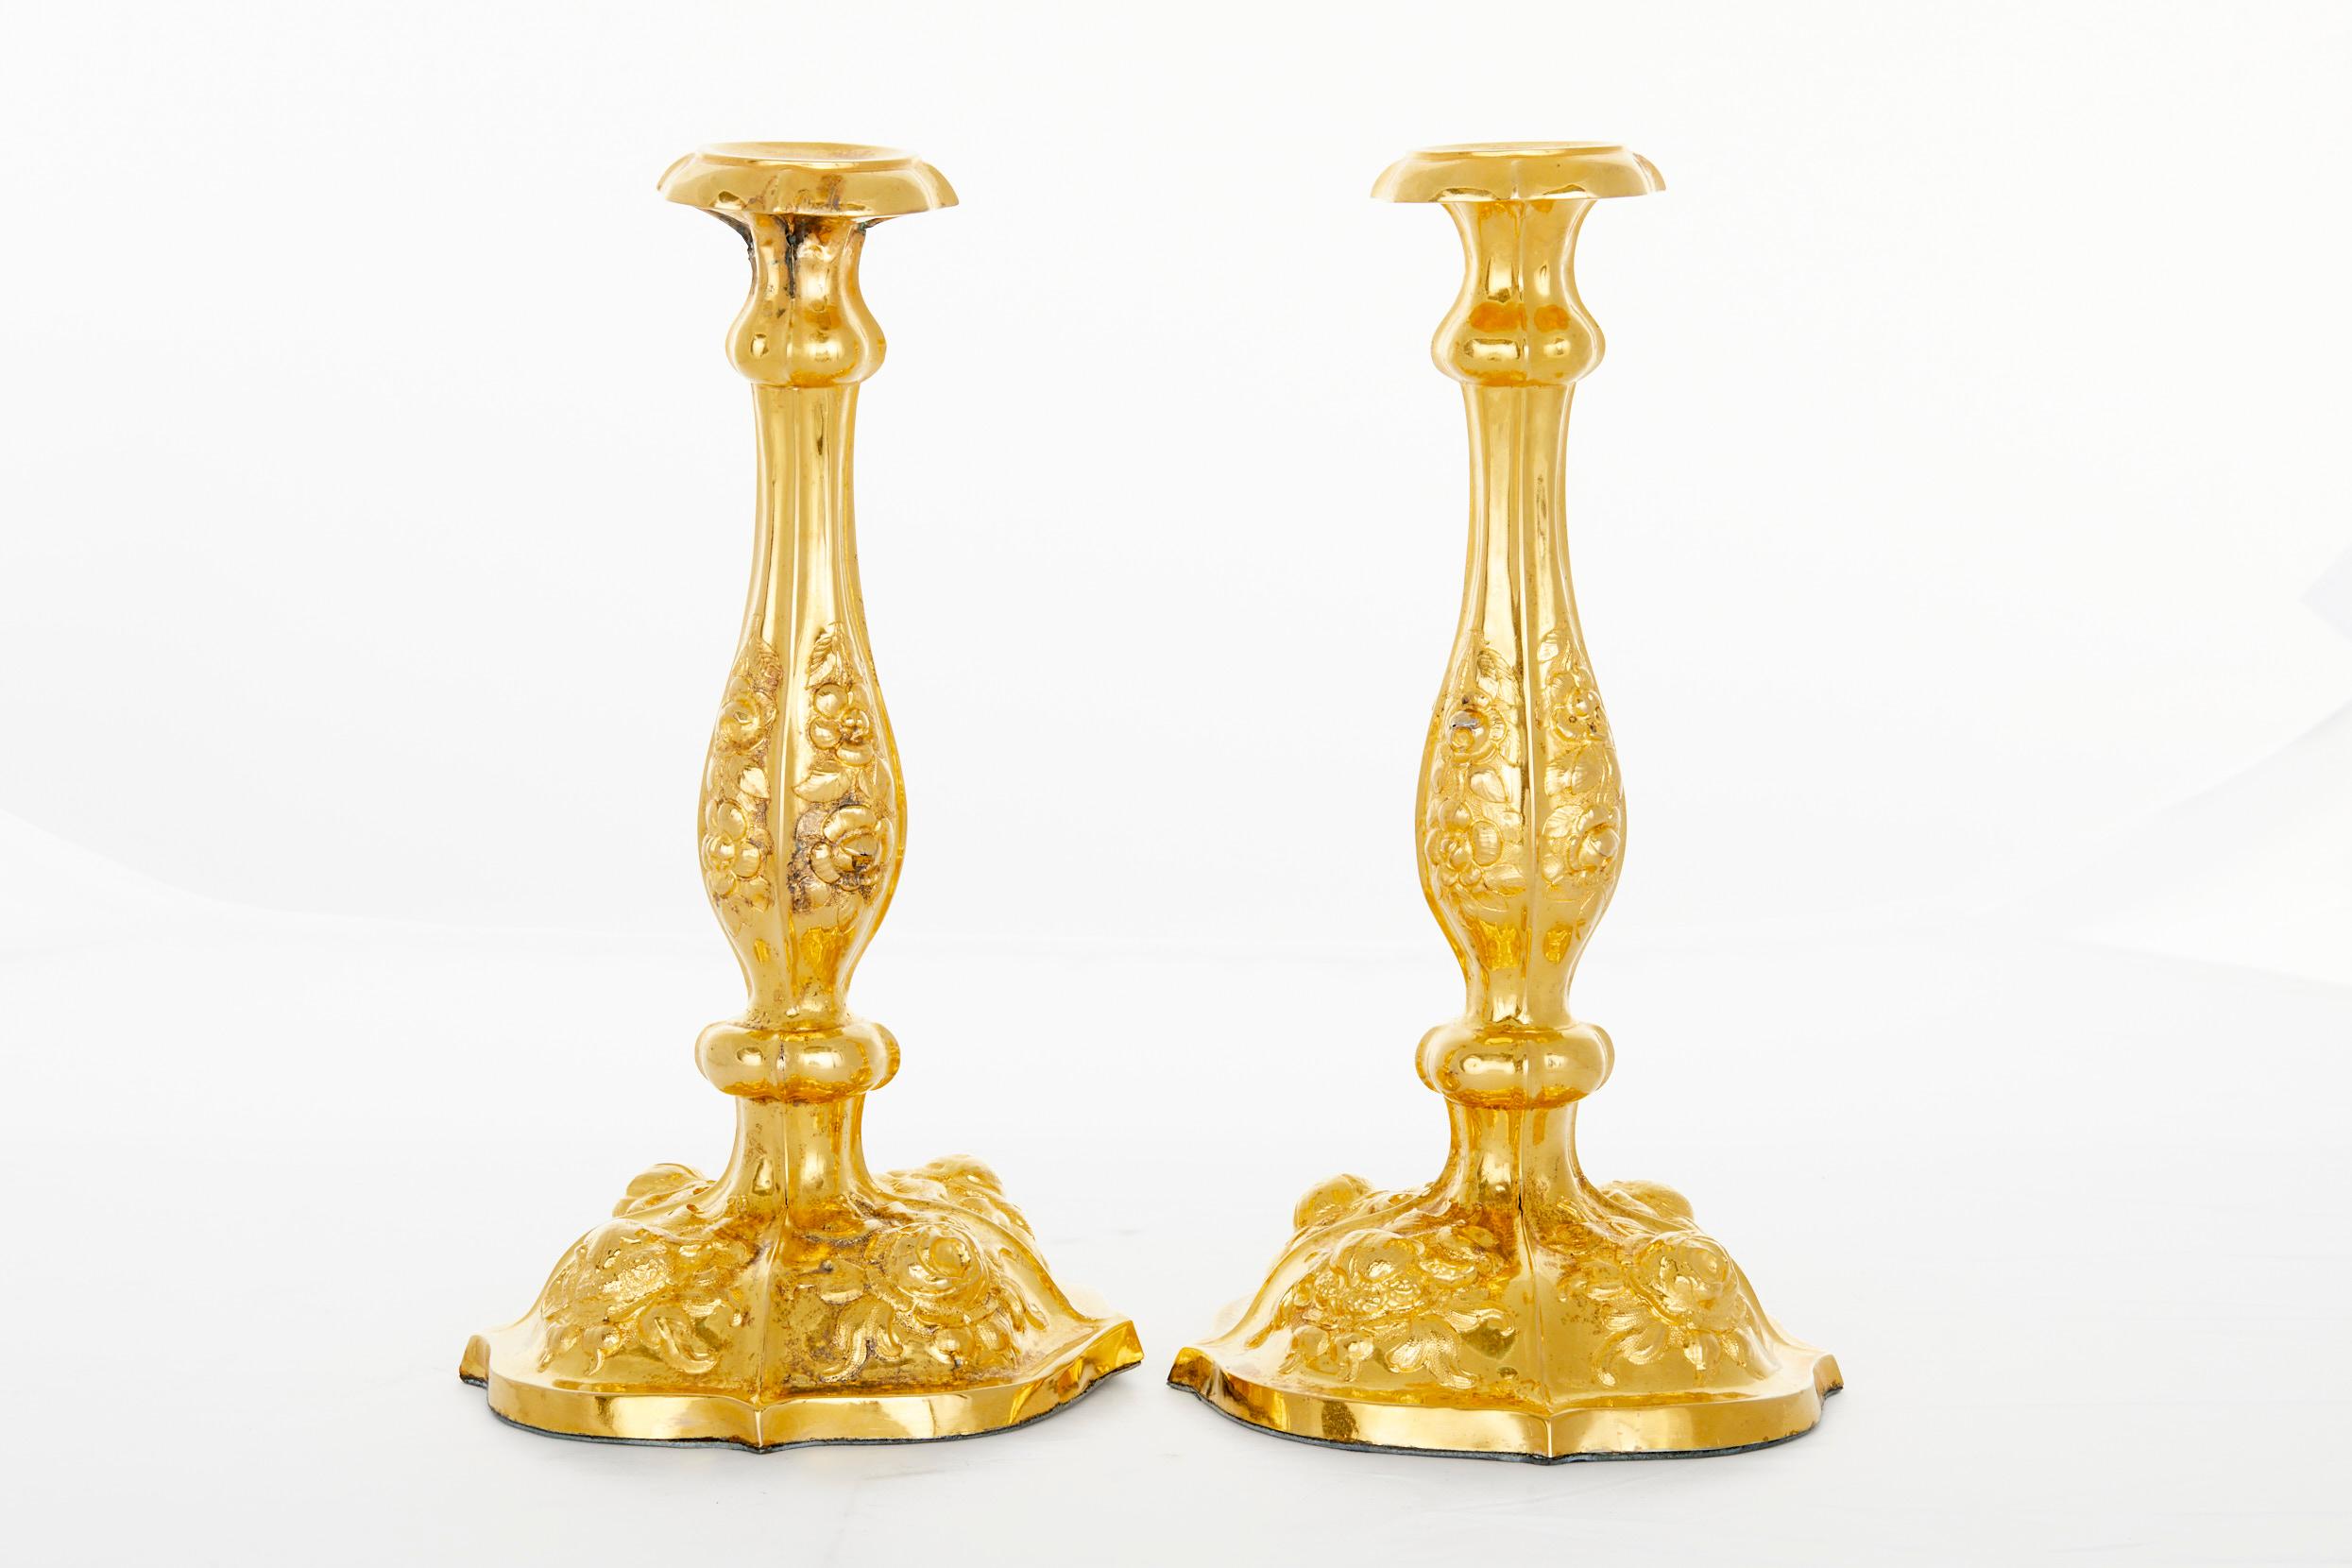 Tiffany & Co. Silver / Gilt Pair Continental Candlesticks For Sale 3